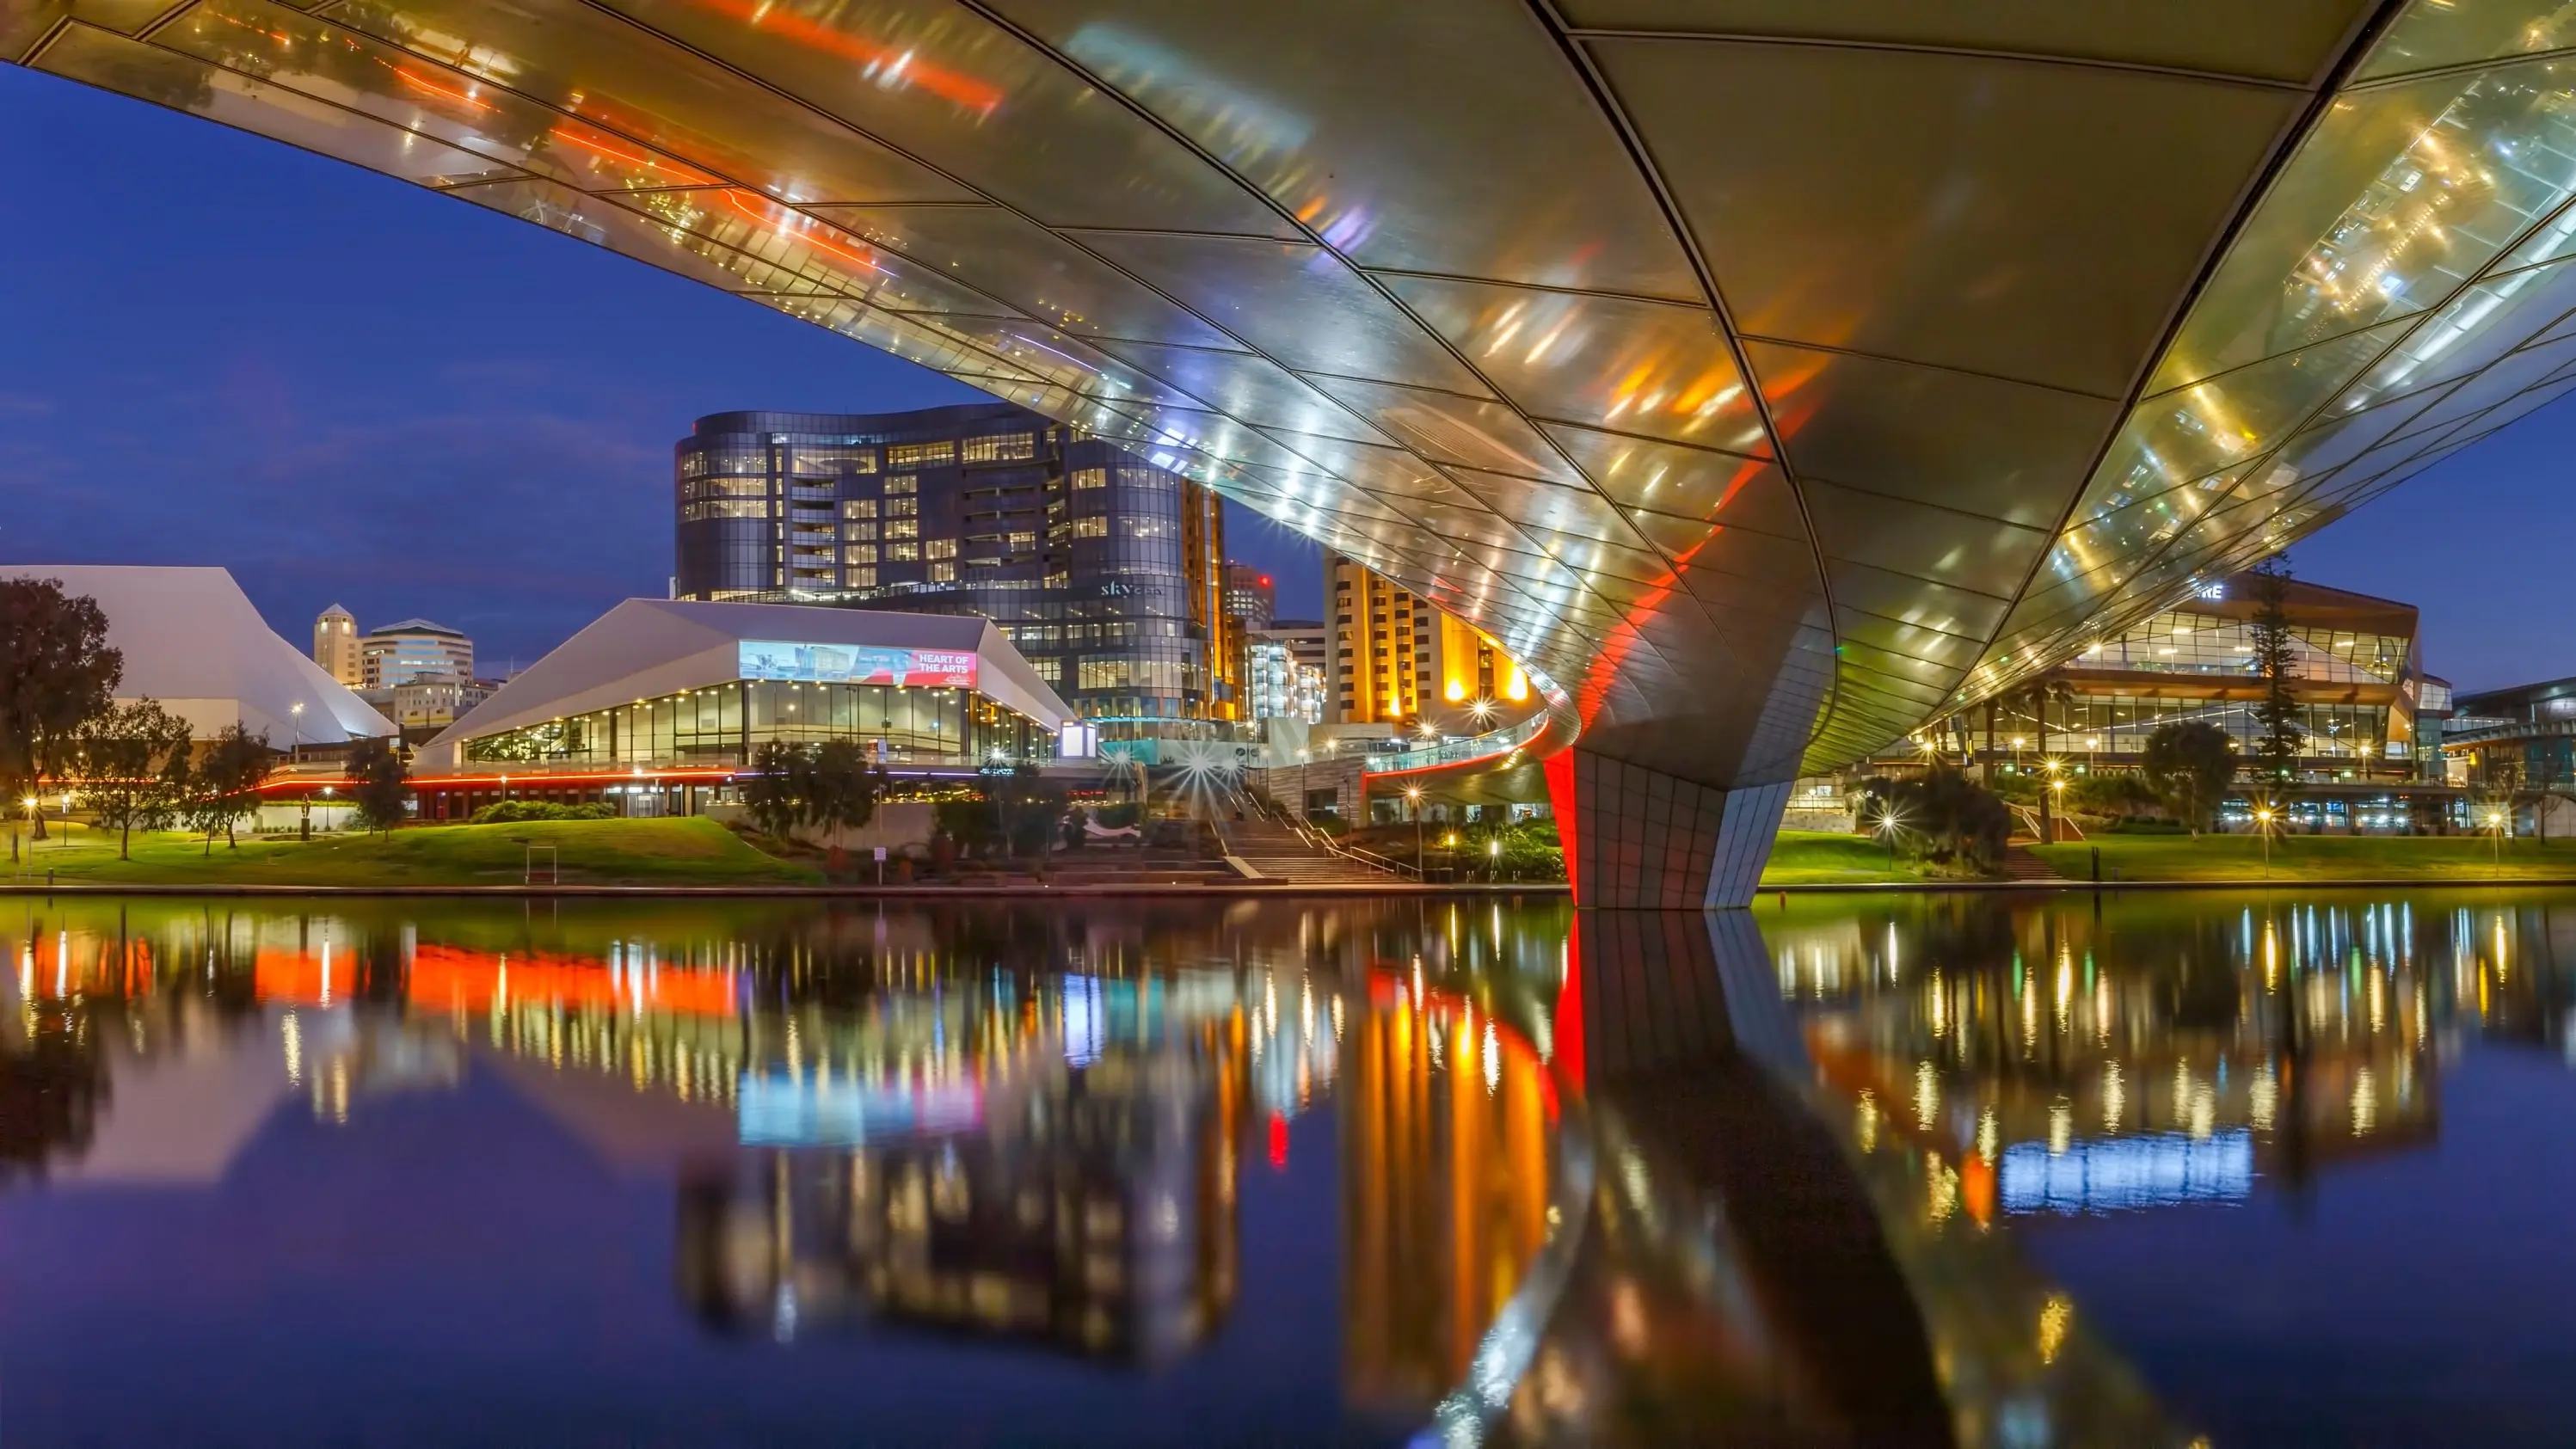 View from under the Riverbank Bridge of the Riverbank Precinct skyline at night and its reflection on the River Torrens, Adelaide. Image credit: South Australia Tourism Commission